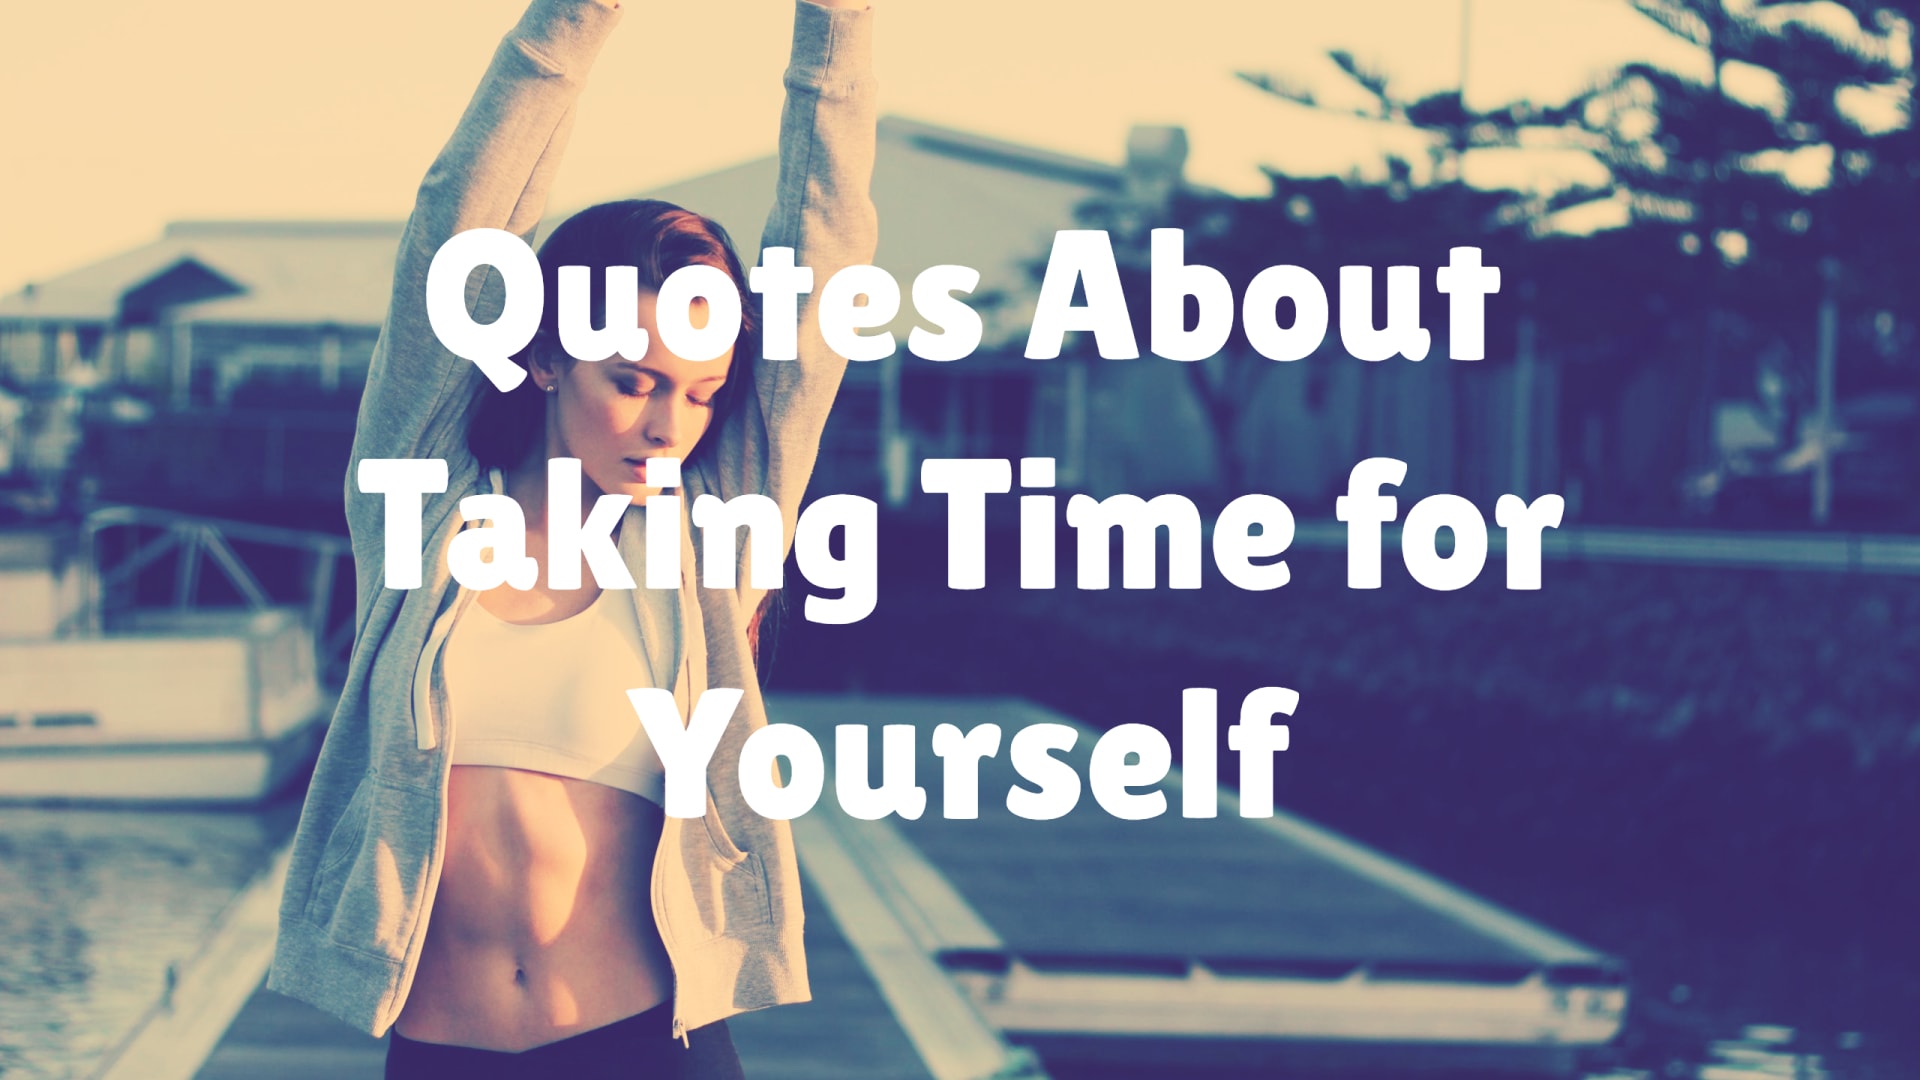 Quotes About Taking Time for Yourself